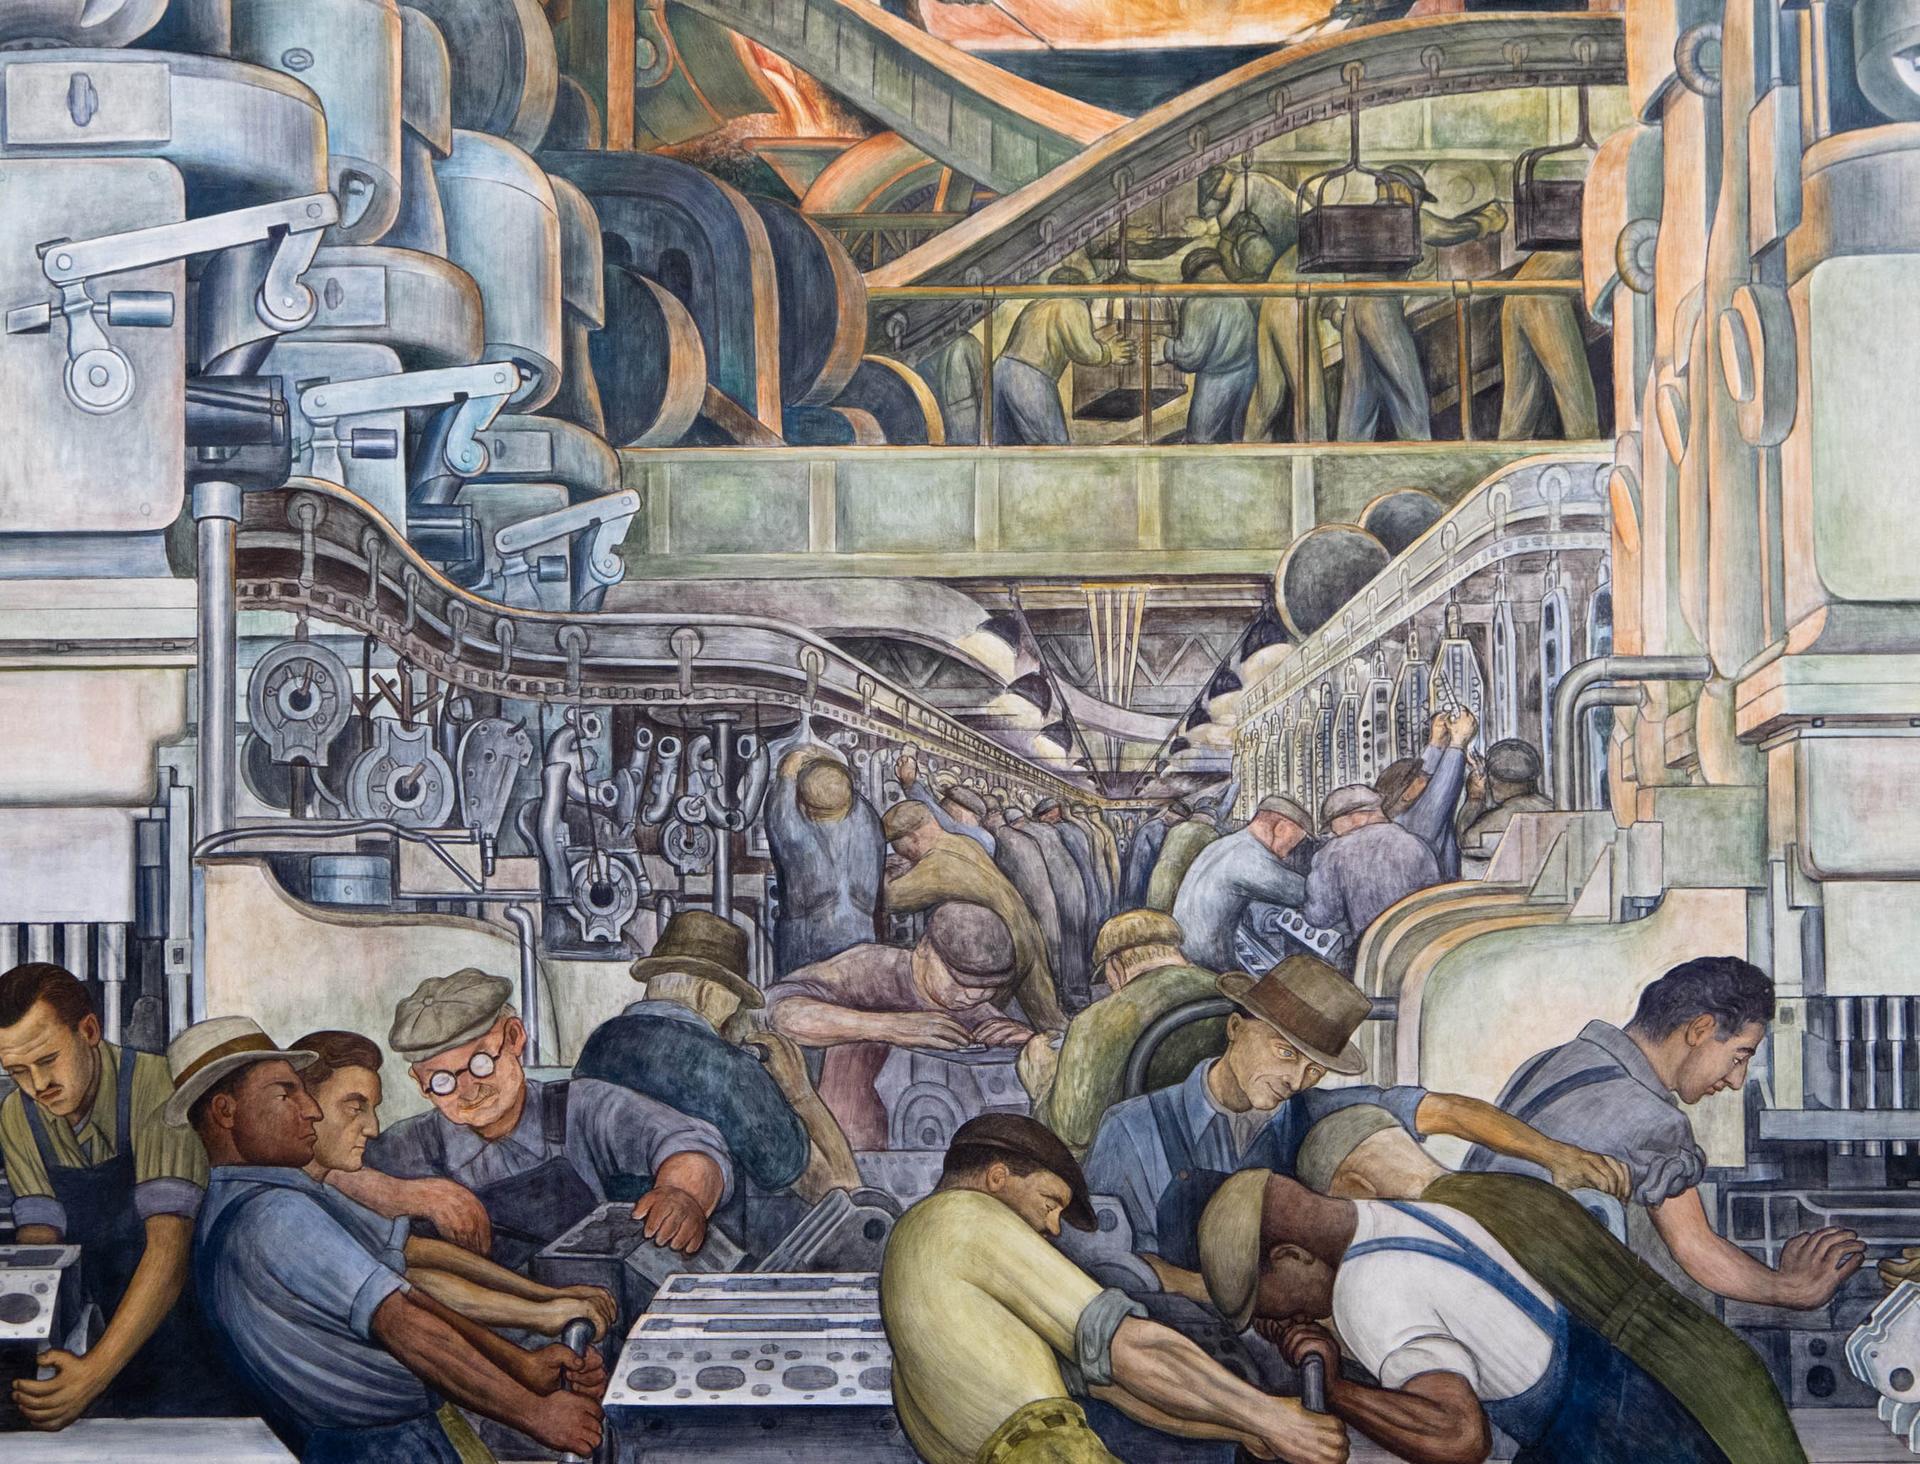 Detroit Industry, east wall (detail), Diego Rivera, 1932. Detroit Institute of Arts